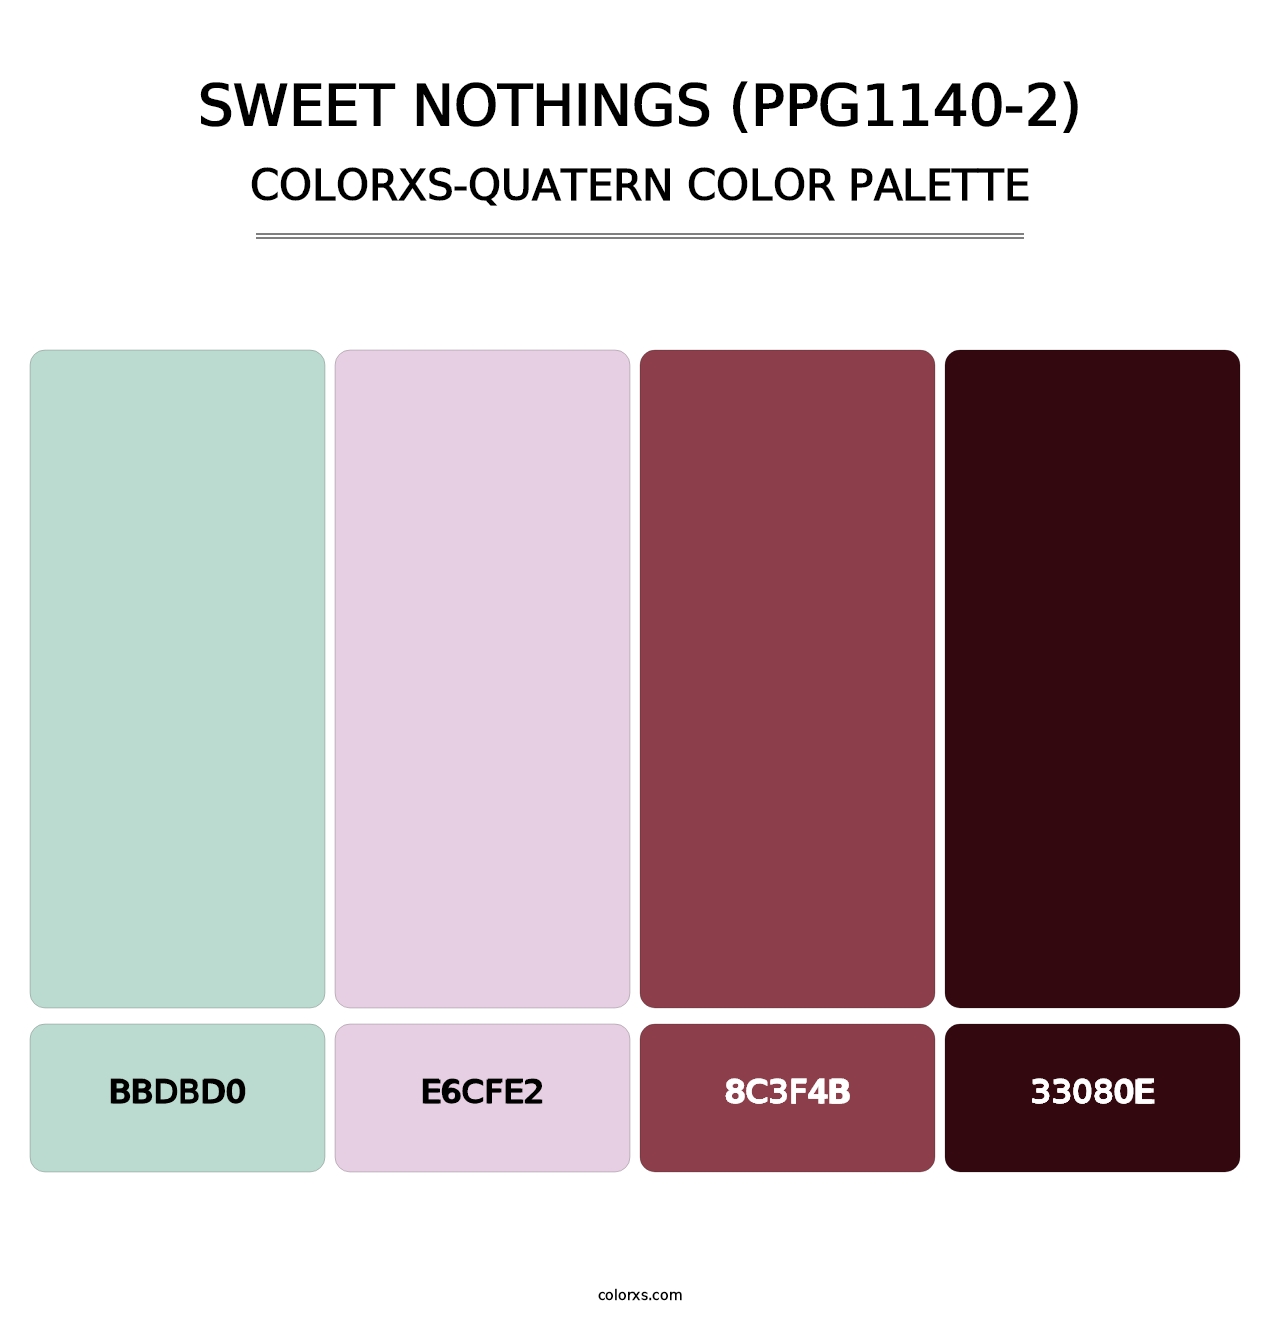 Sweet Nothings (PPG1140-2) - Colorxs Quatern Palette